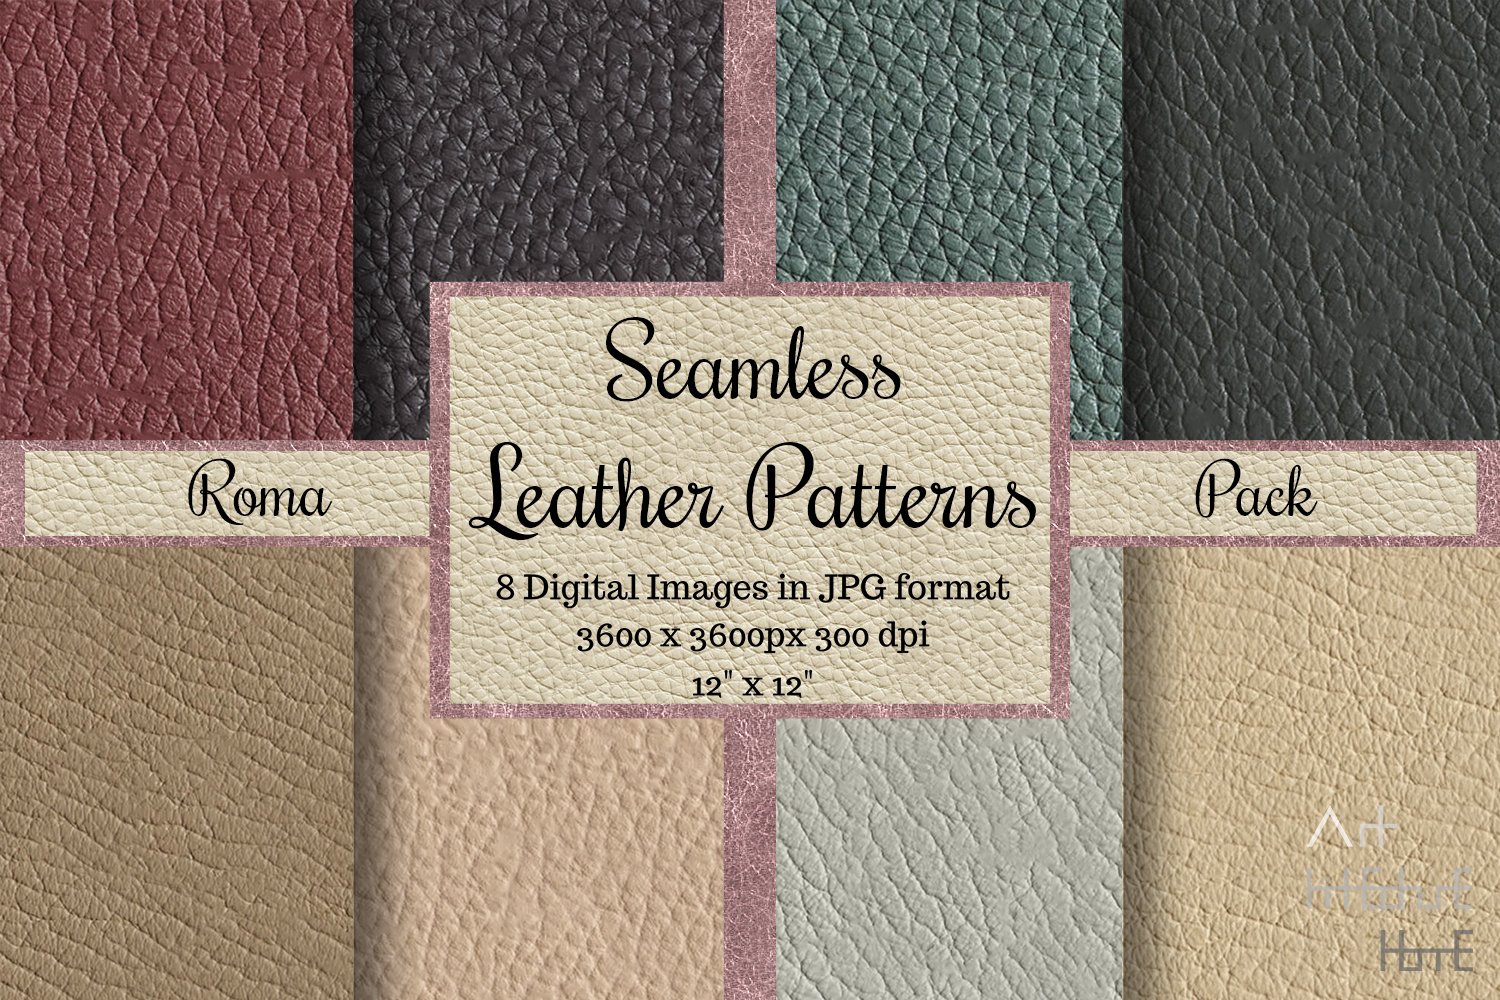 Seamless Leather Patterns Roma Pack cover image.